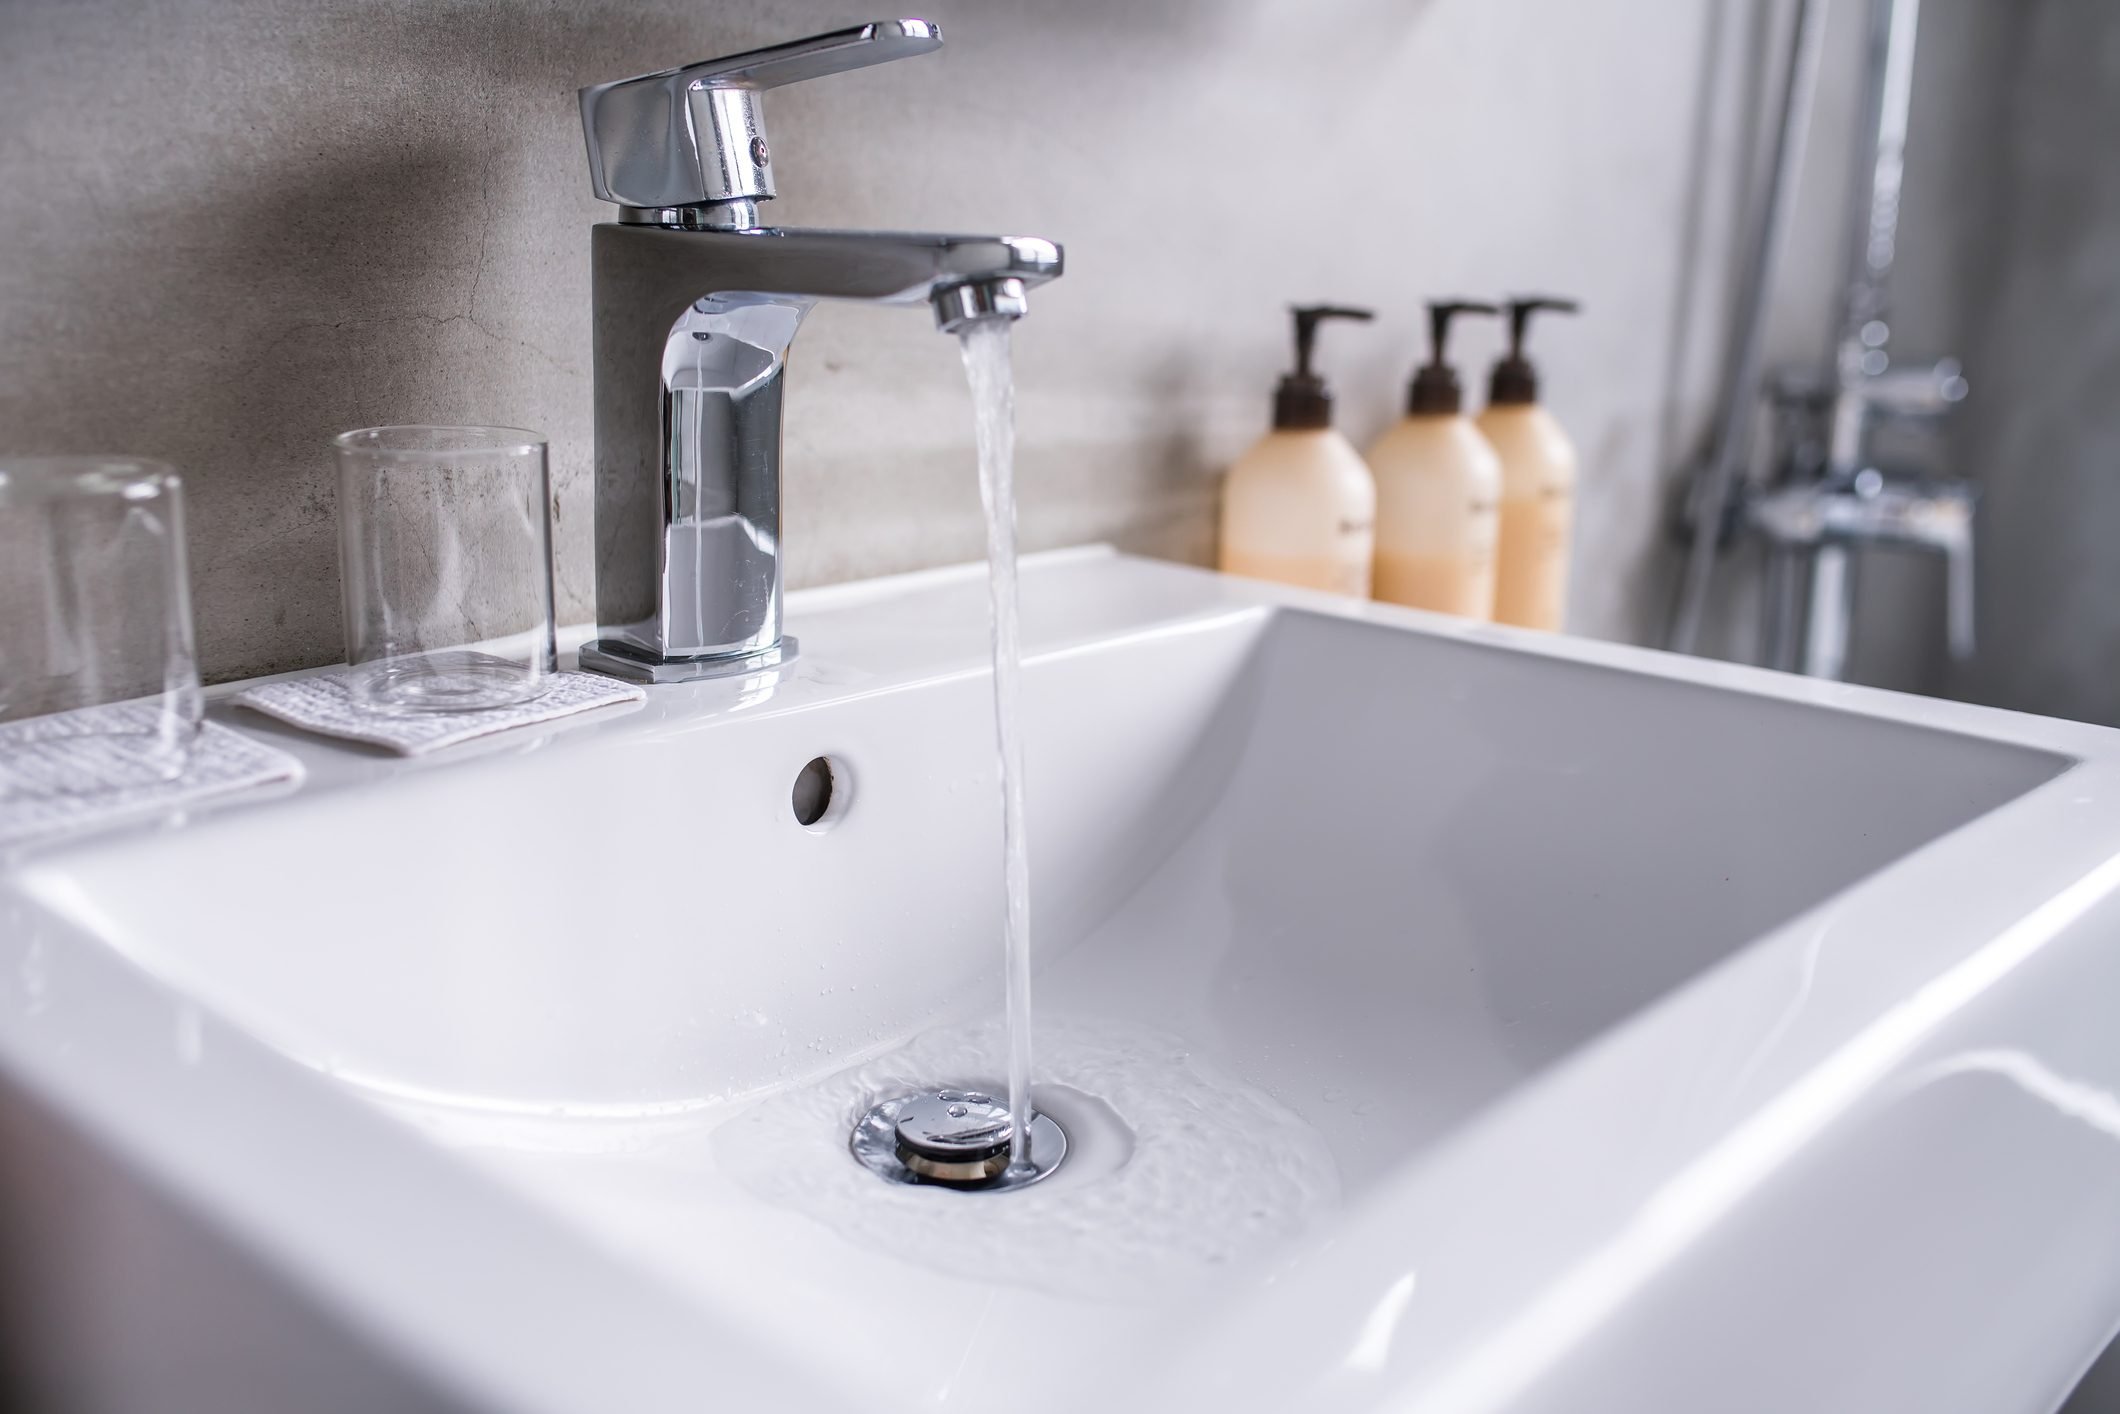 How To Clean a Bathroom Sink: 12 Best Tips